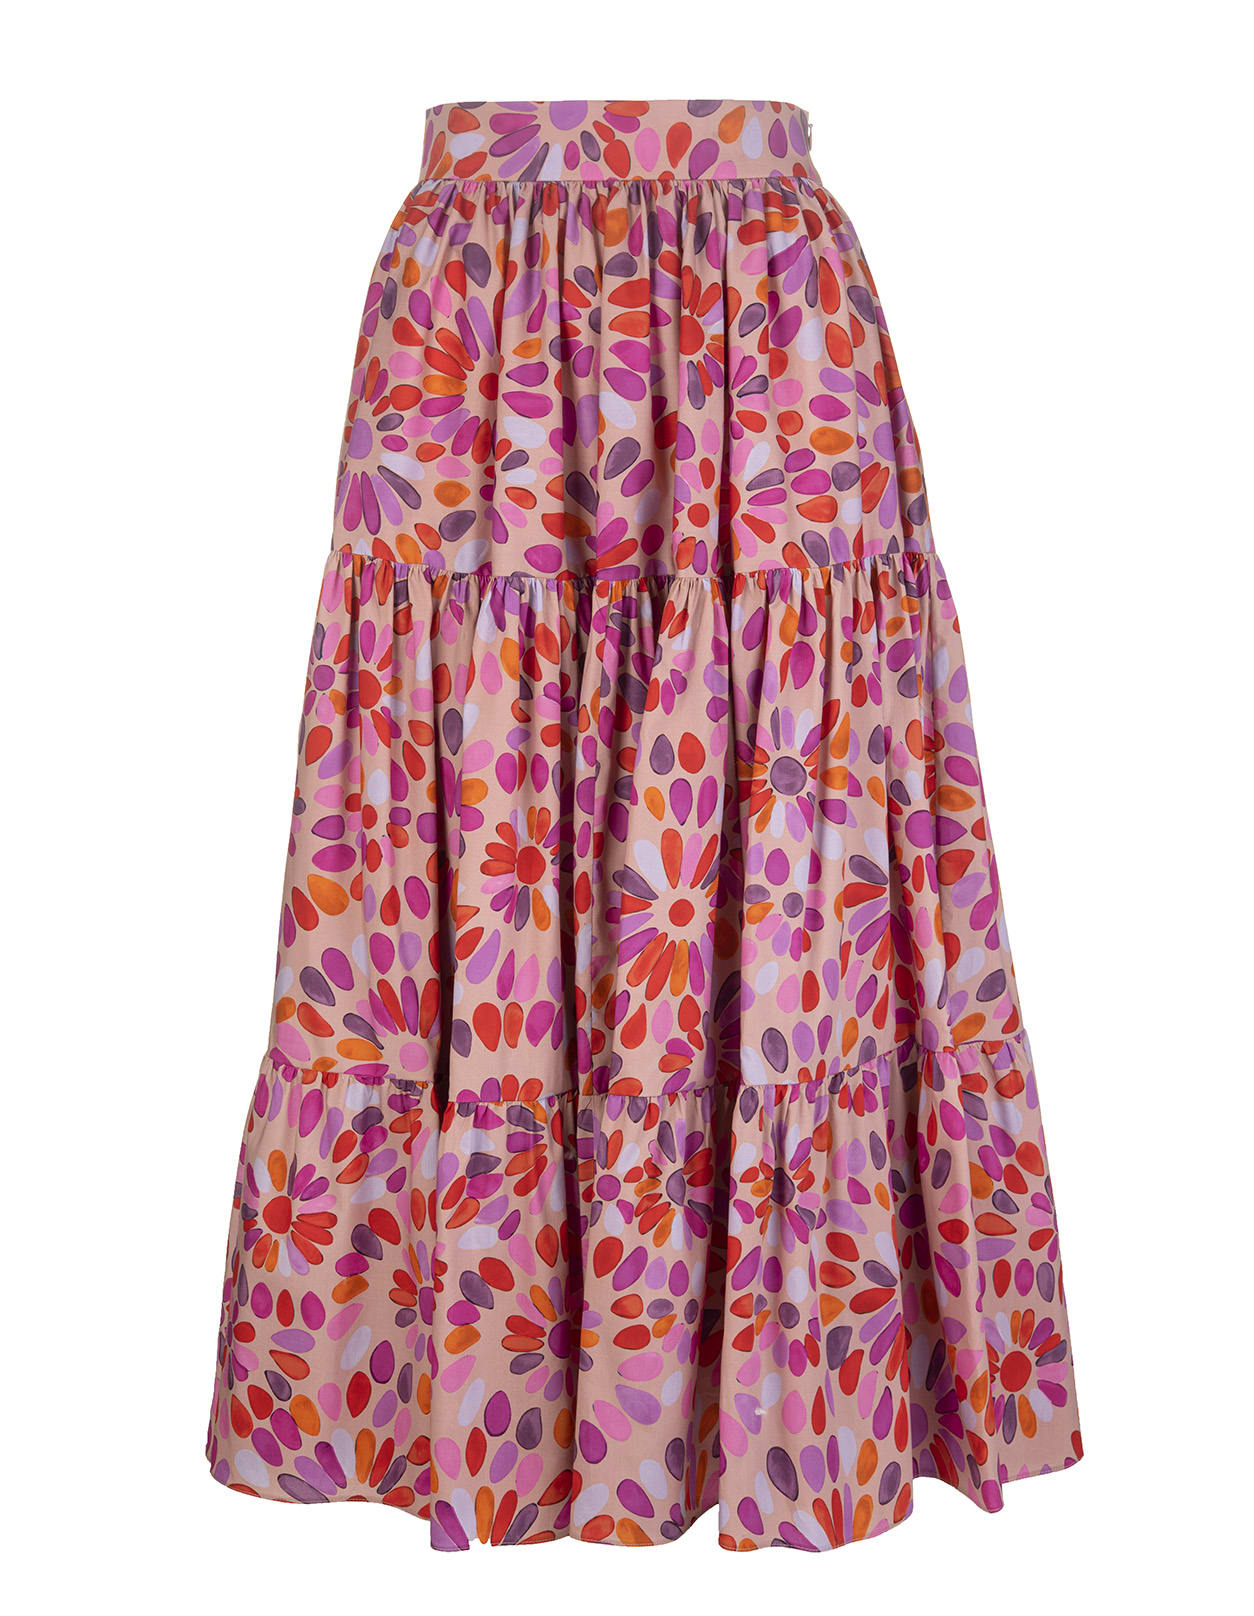 Gianluca Capannolo RED/PINK COTTON FLORAL-PRINT TIERED SKIRT